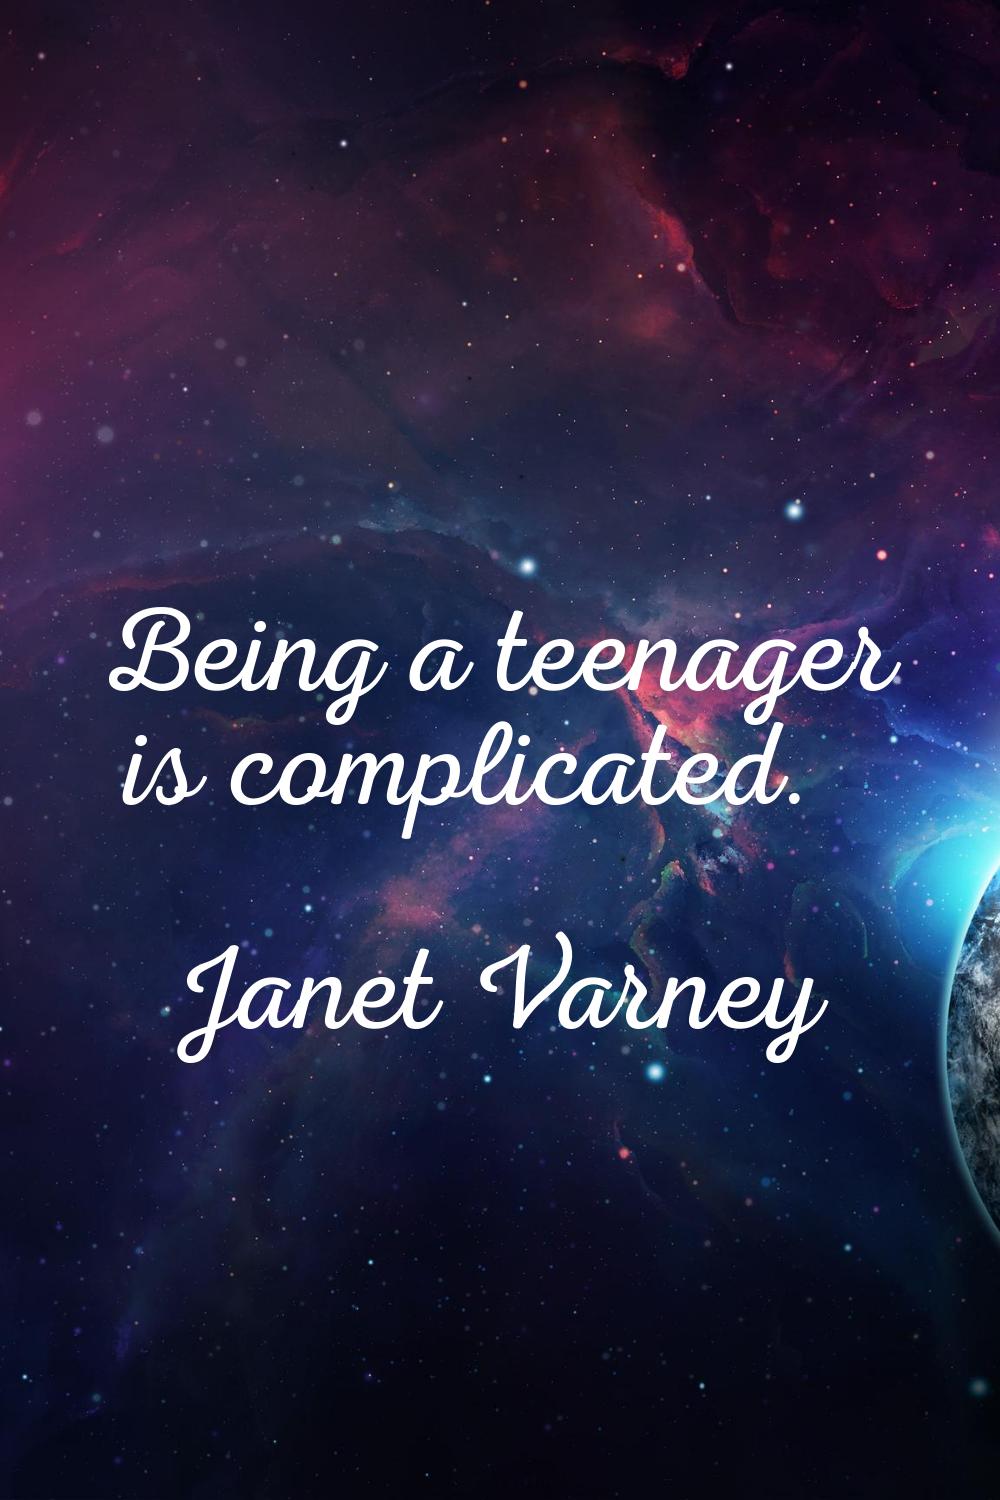 Being a teenager is complicated.